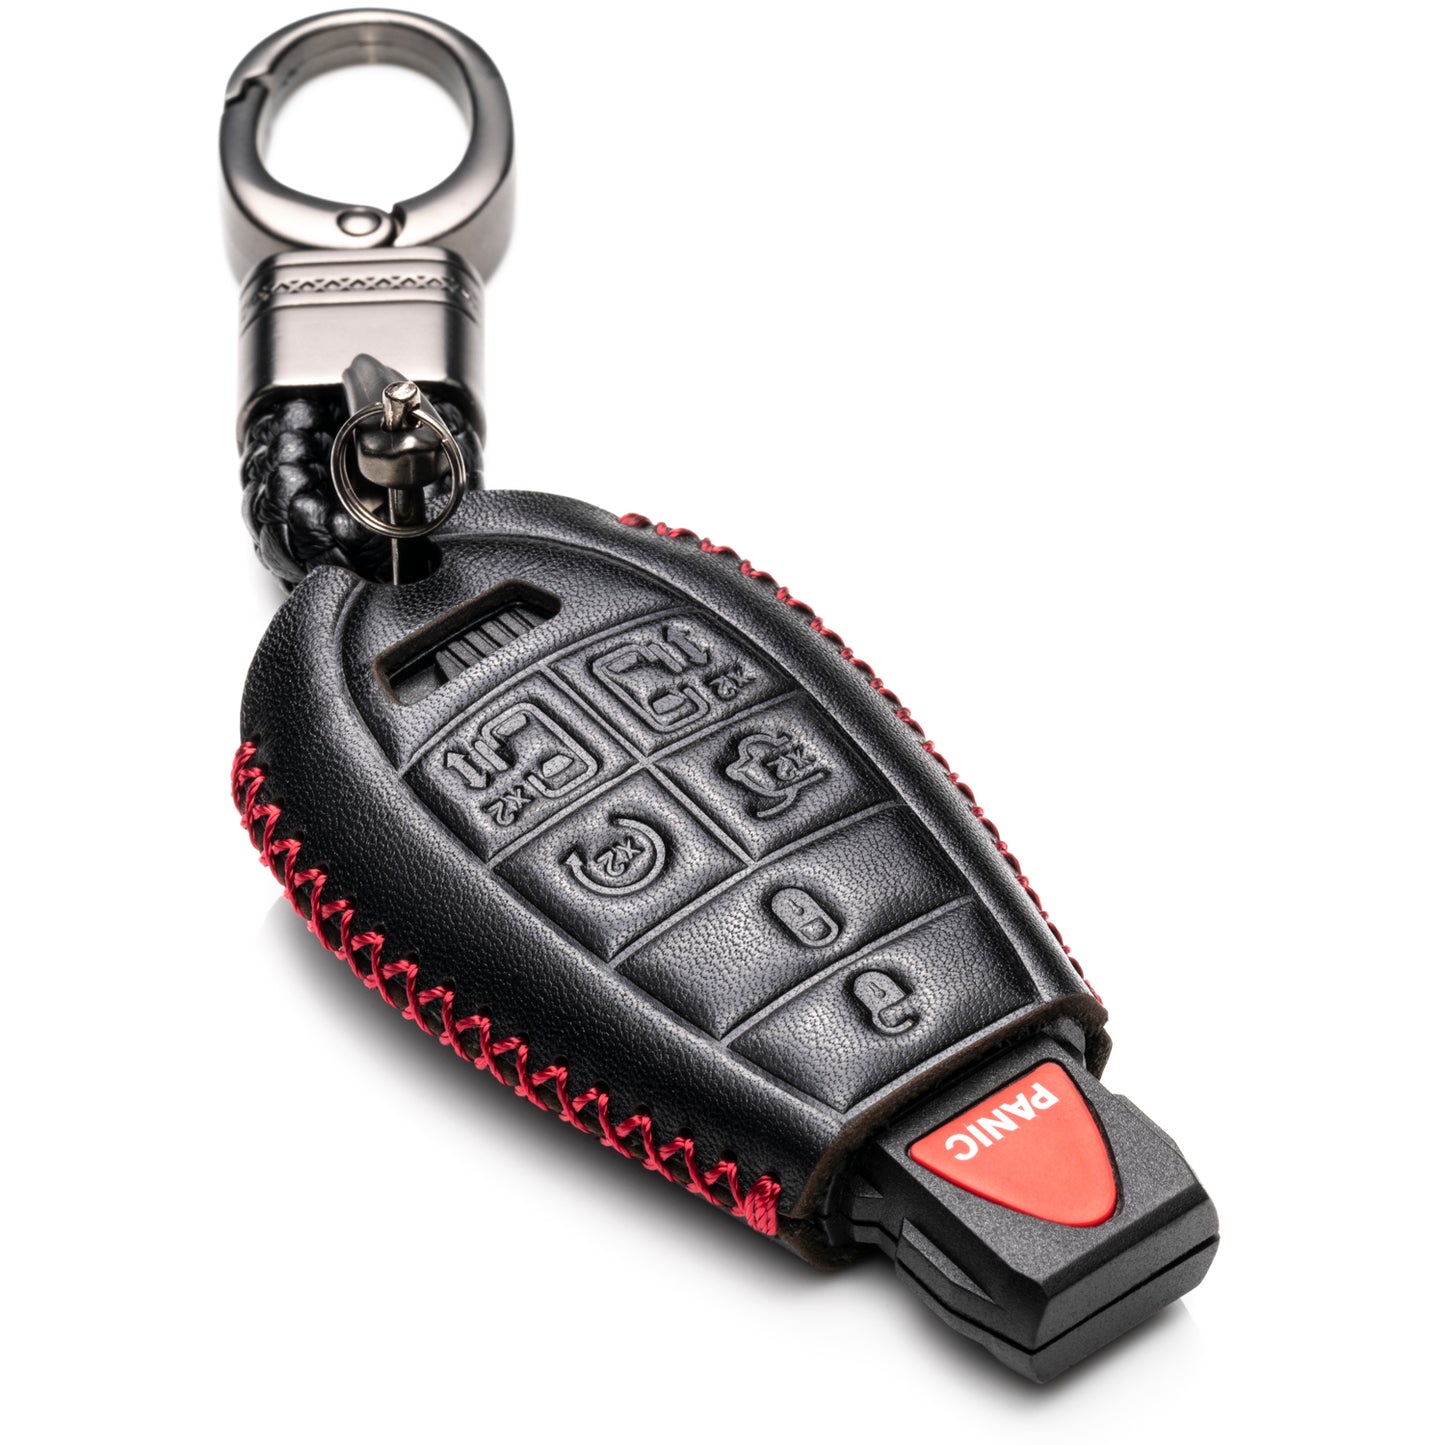 Vitodeco Genuine Leather Smart Key Fob Case Cover Protector with Leather Key Chain Compatible for 2013 - 2020 Dodge Grand Caravan